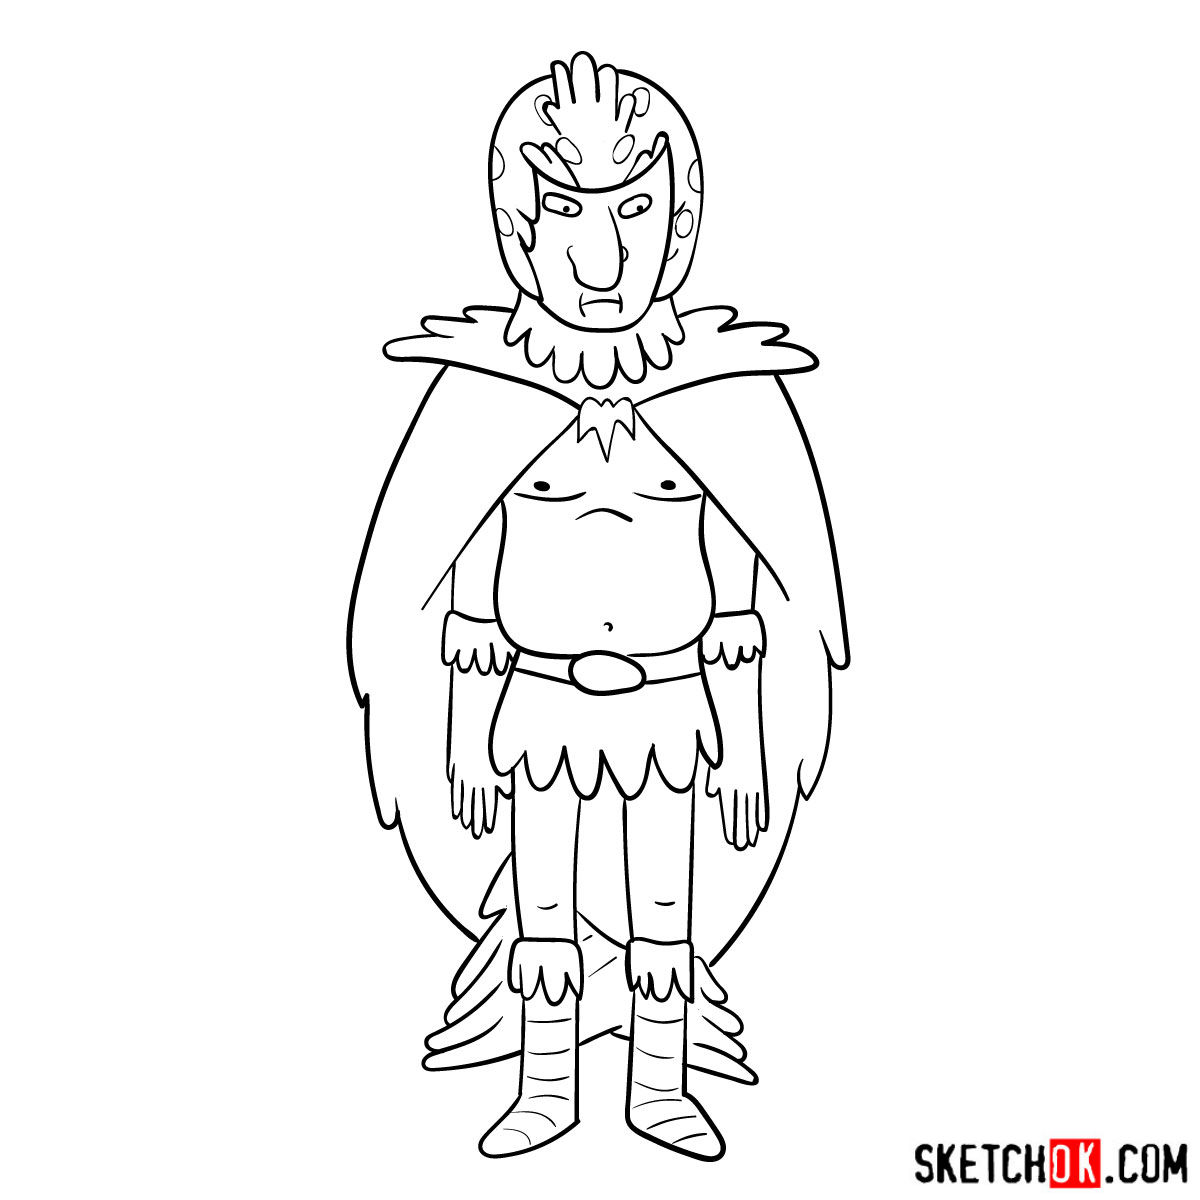 How to draw Birdperson from Rick and Morty series - step 13